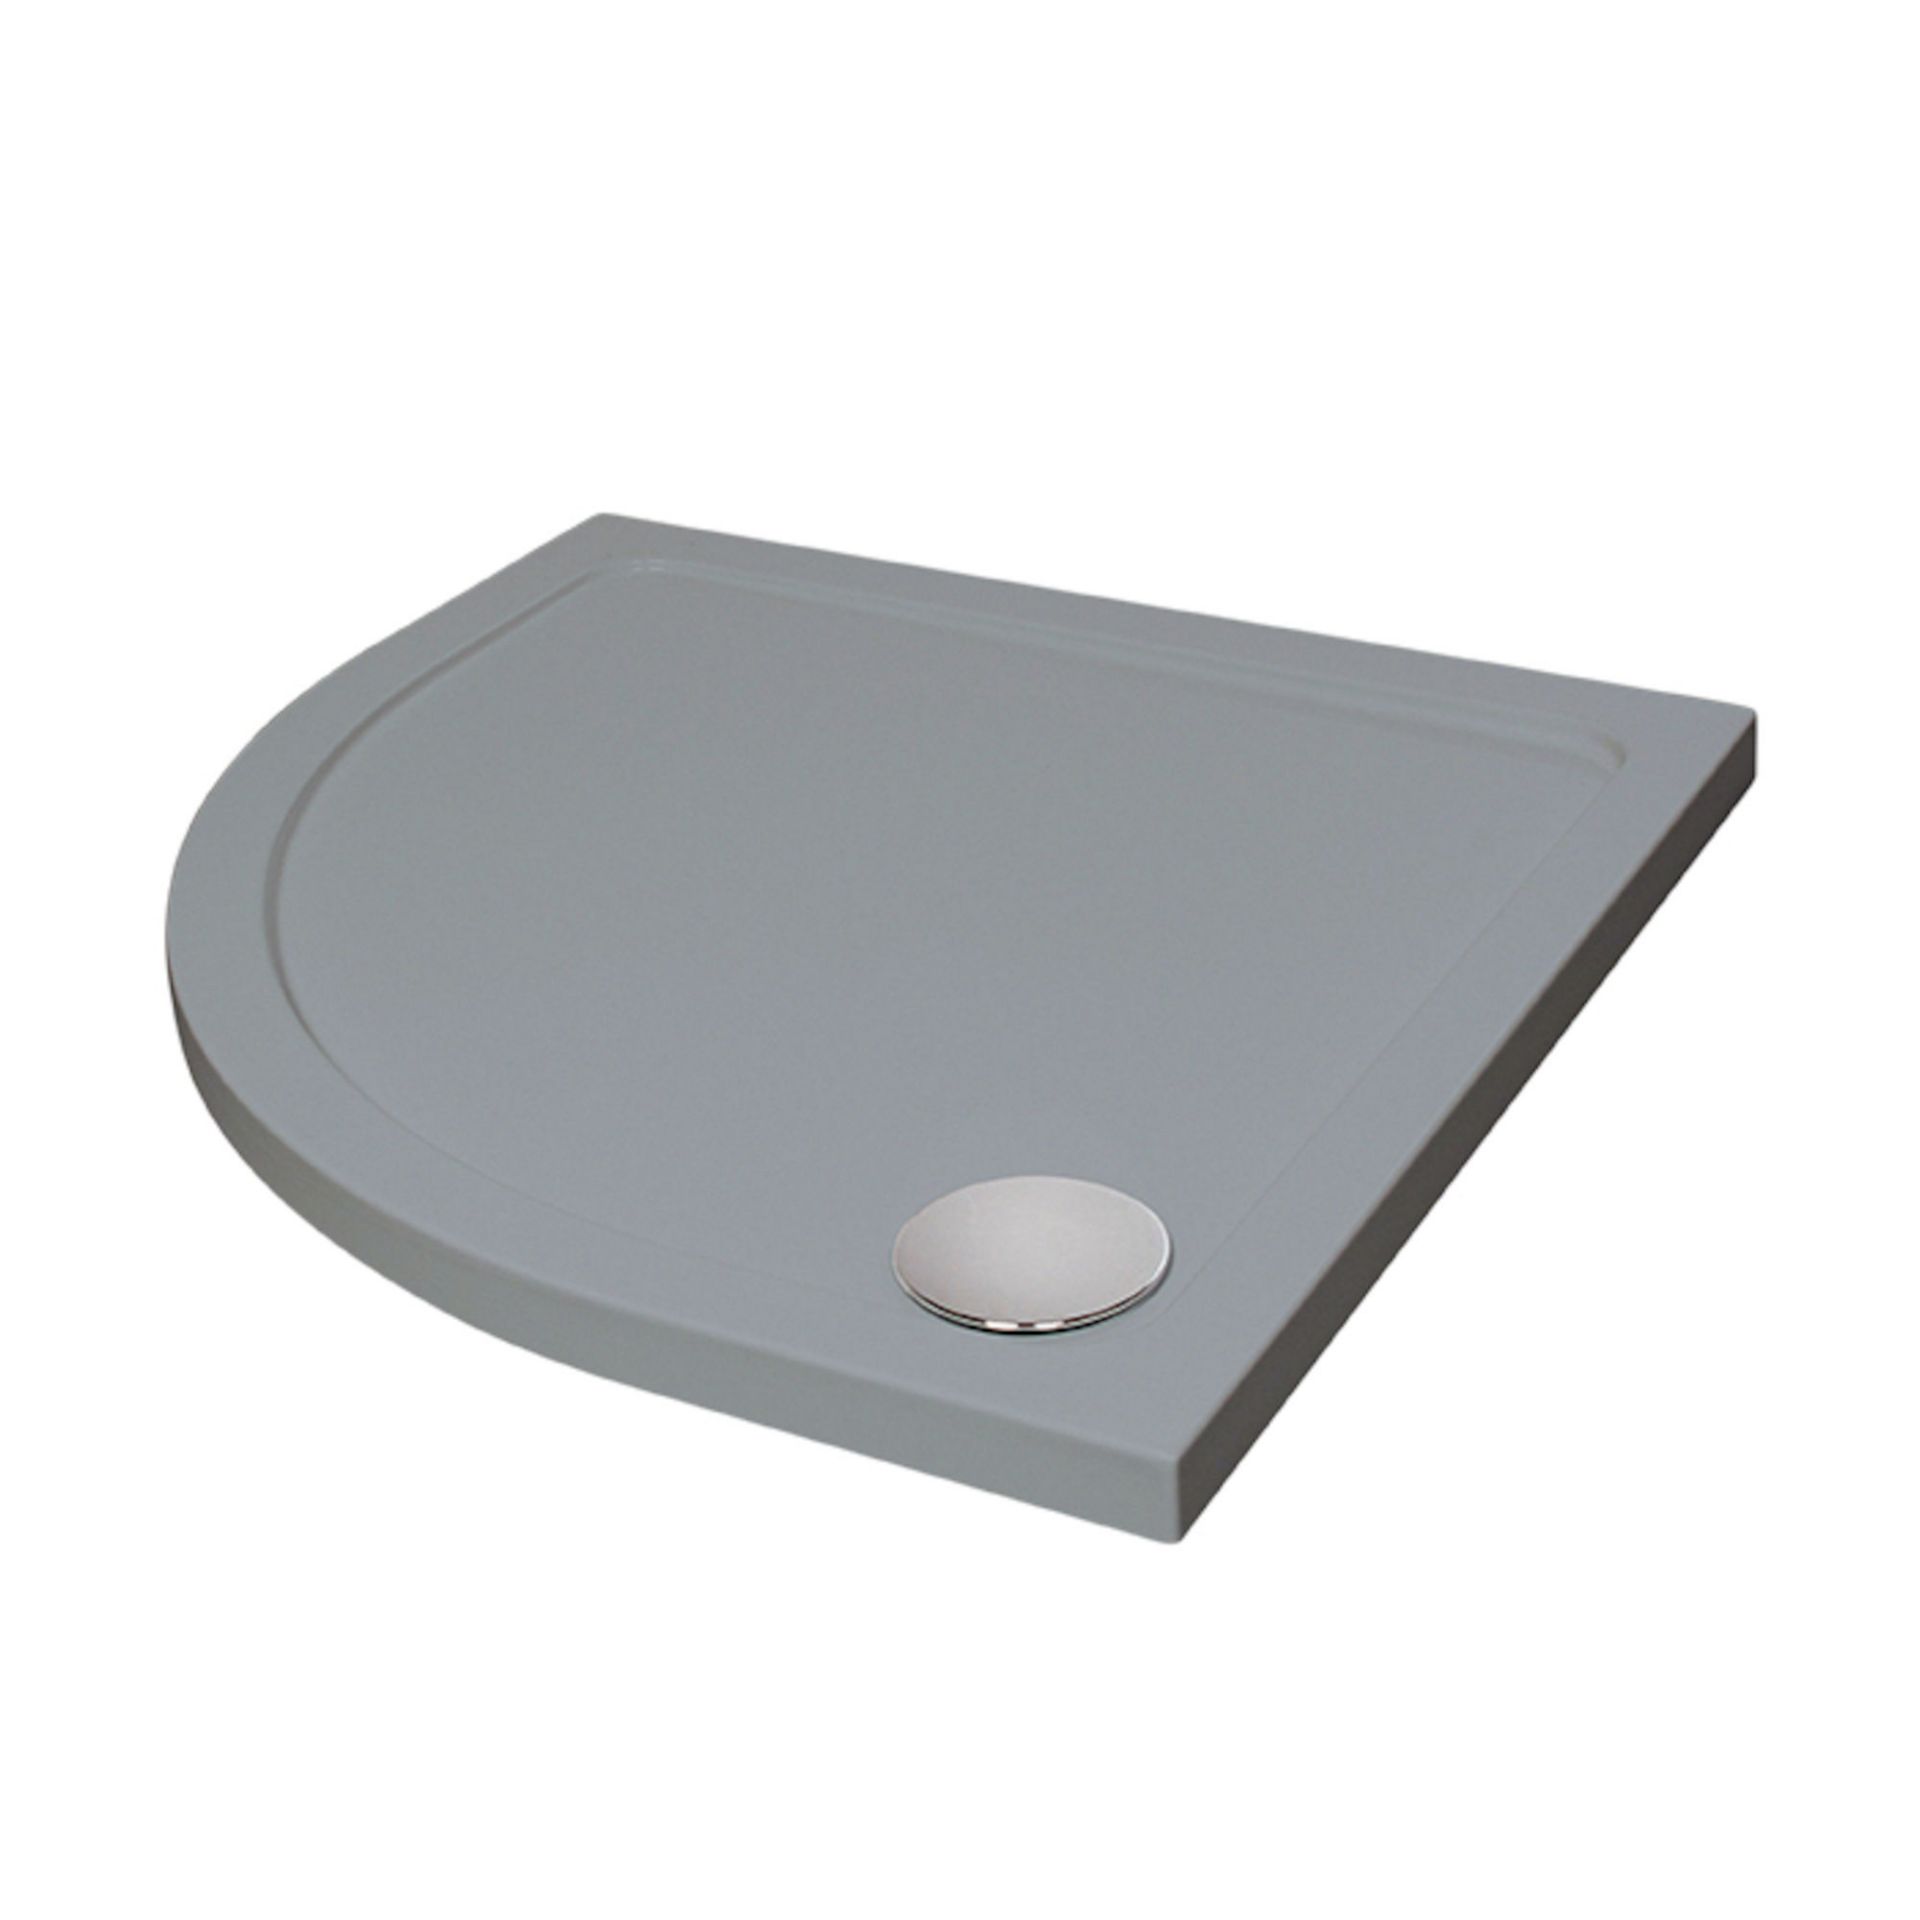 (KL52) 1000 x 800mm Right Offset Quadrant Ultra Slim Stone Shower Tray in Grey. Acrylic capped stone